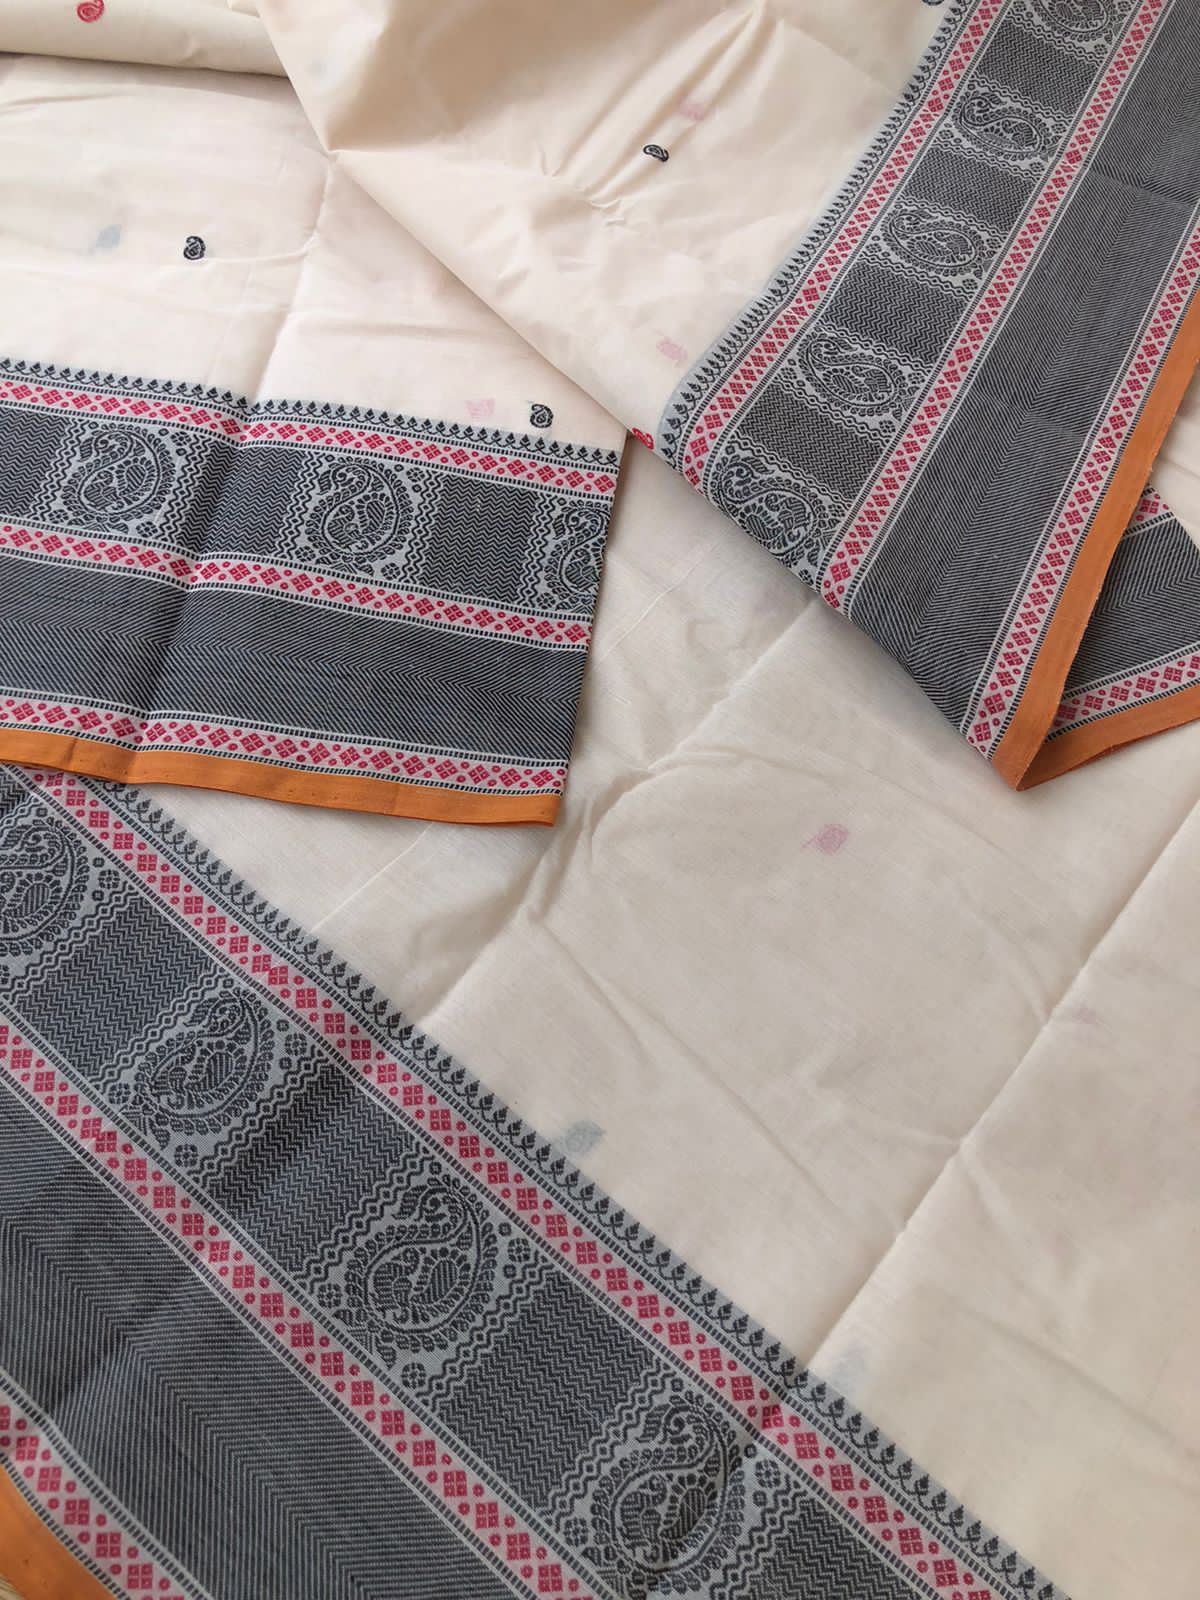 Mangalavastaram - smart and classy off white with woven borders ( this is not pure white )